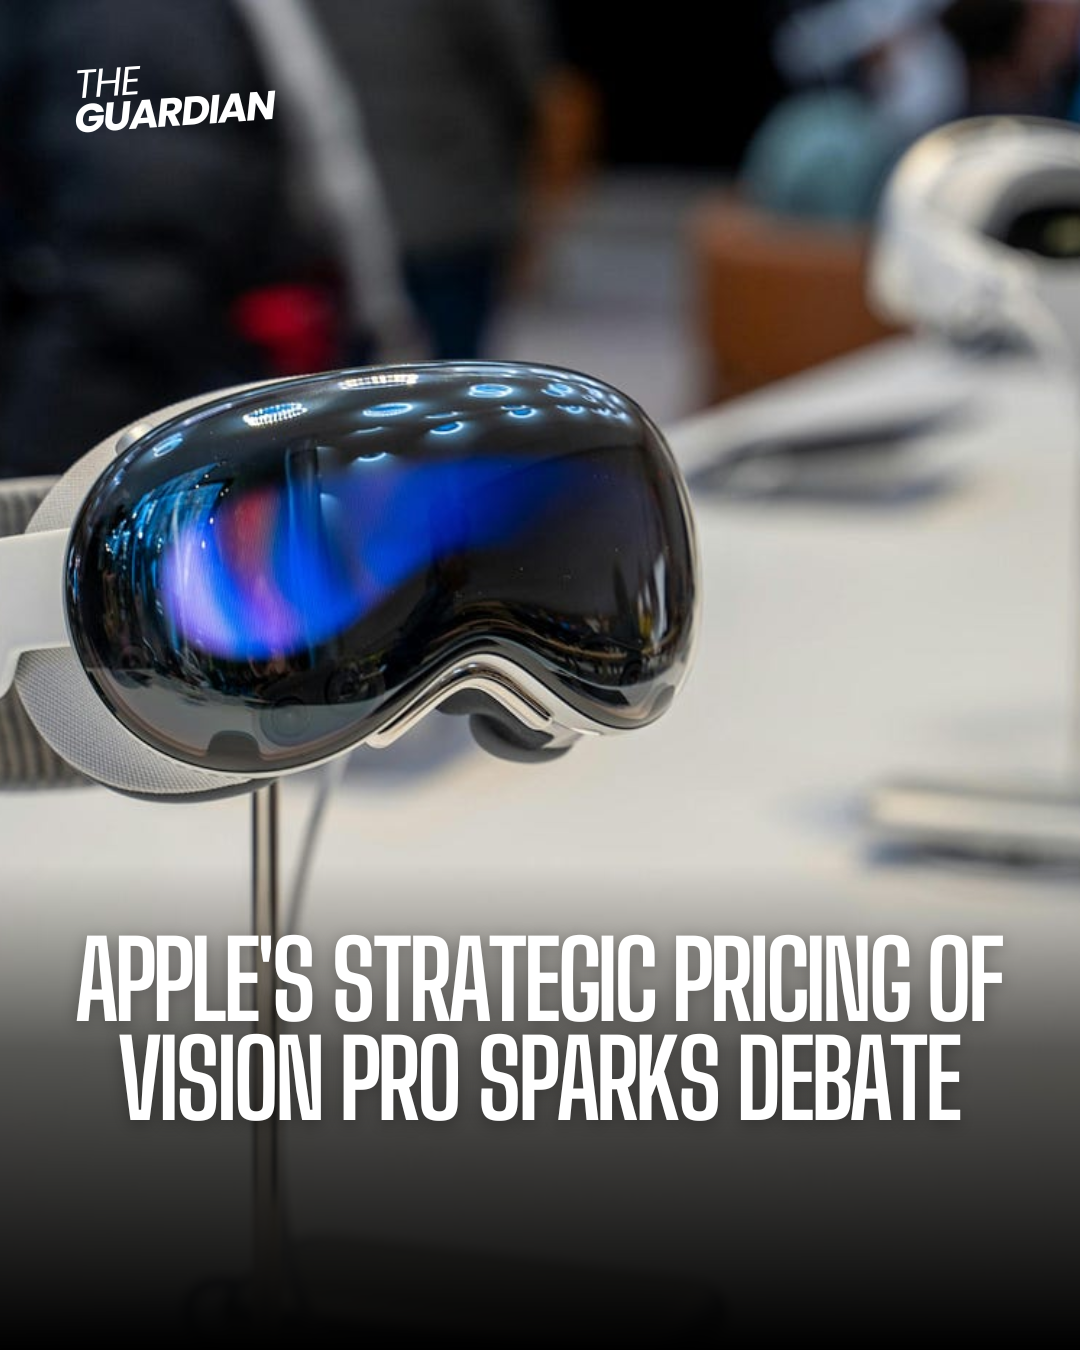 Apple's decision to price the Vision Pro at a premium $3,499 has sparked debate within the corporate world.